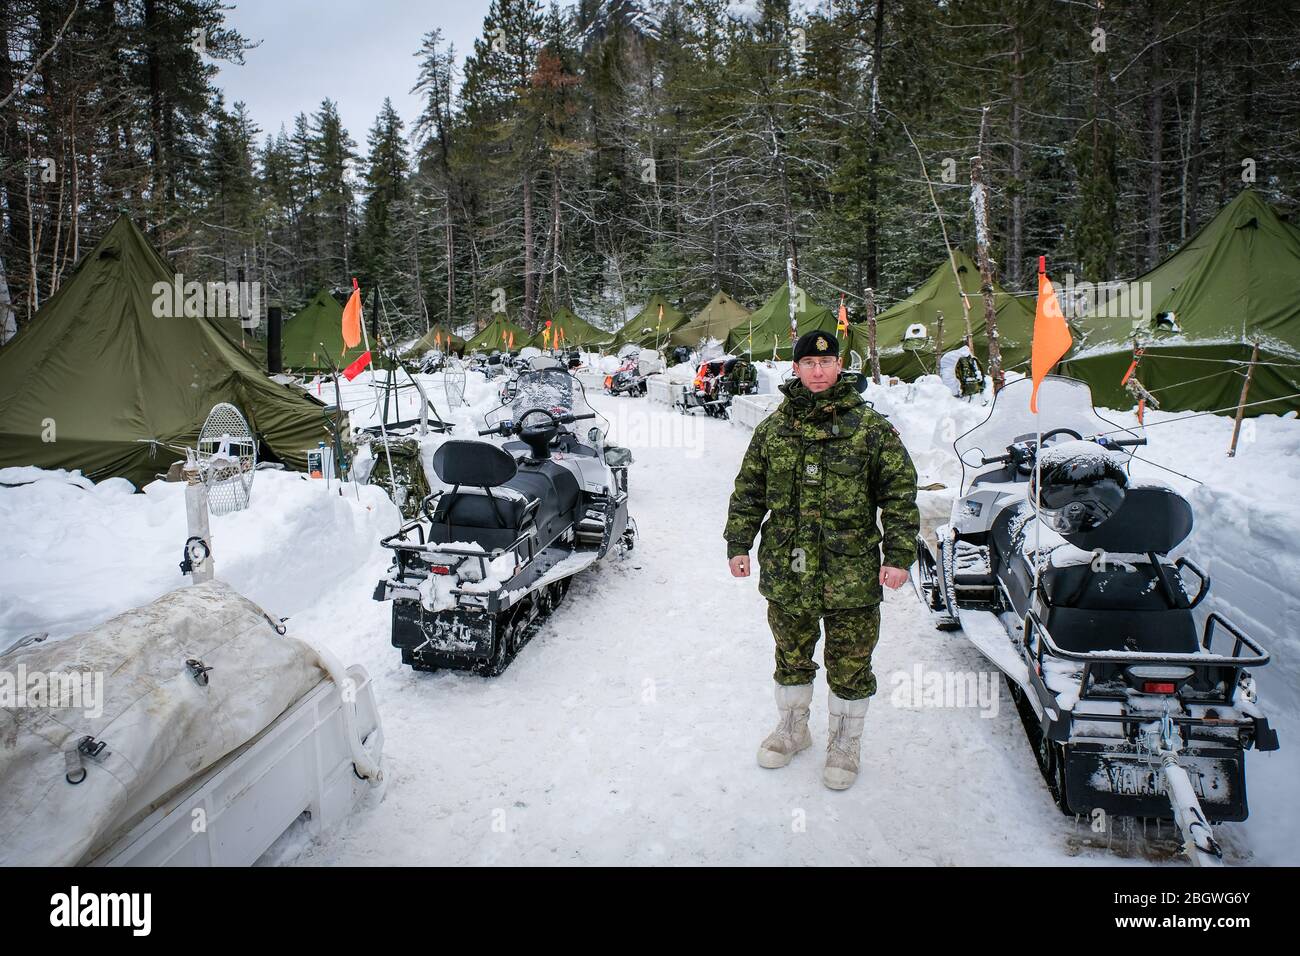 SAGUENAY, CANADA - JANUARY 20: an officer with snowmobiles behind him during a Franco-Canadian military exercise, Quebec, Saguenay, Canada on January Stock Photo